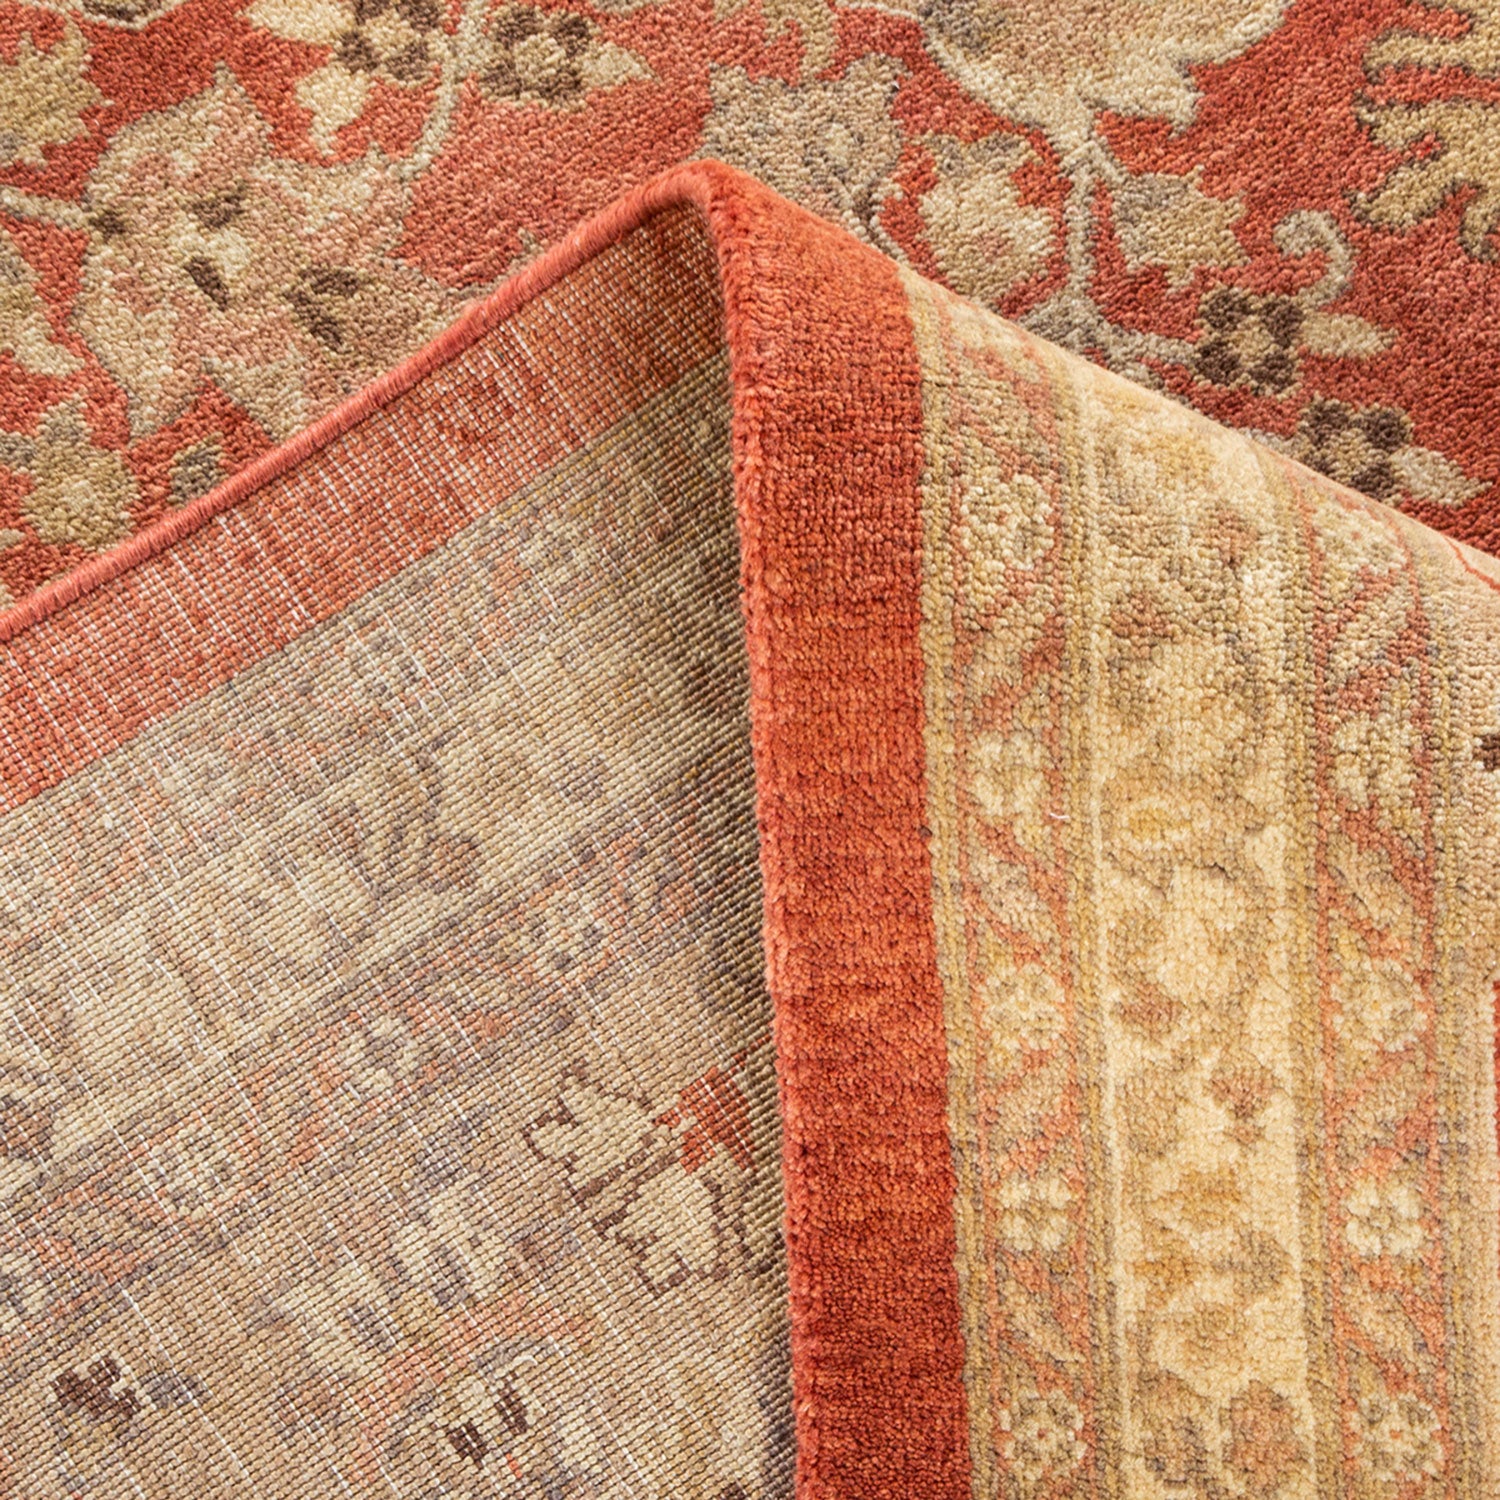 Close-up view of a folded carpet showcasing rich patterns and subtle textures.